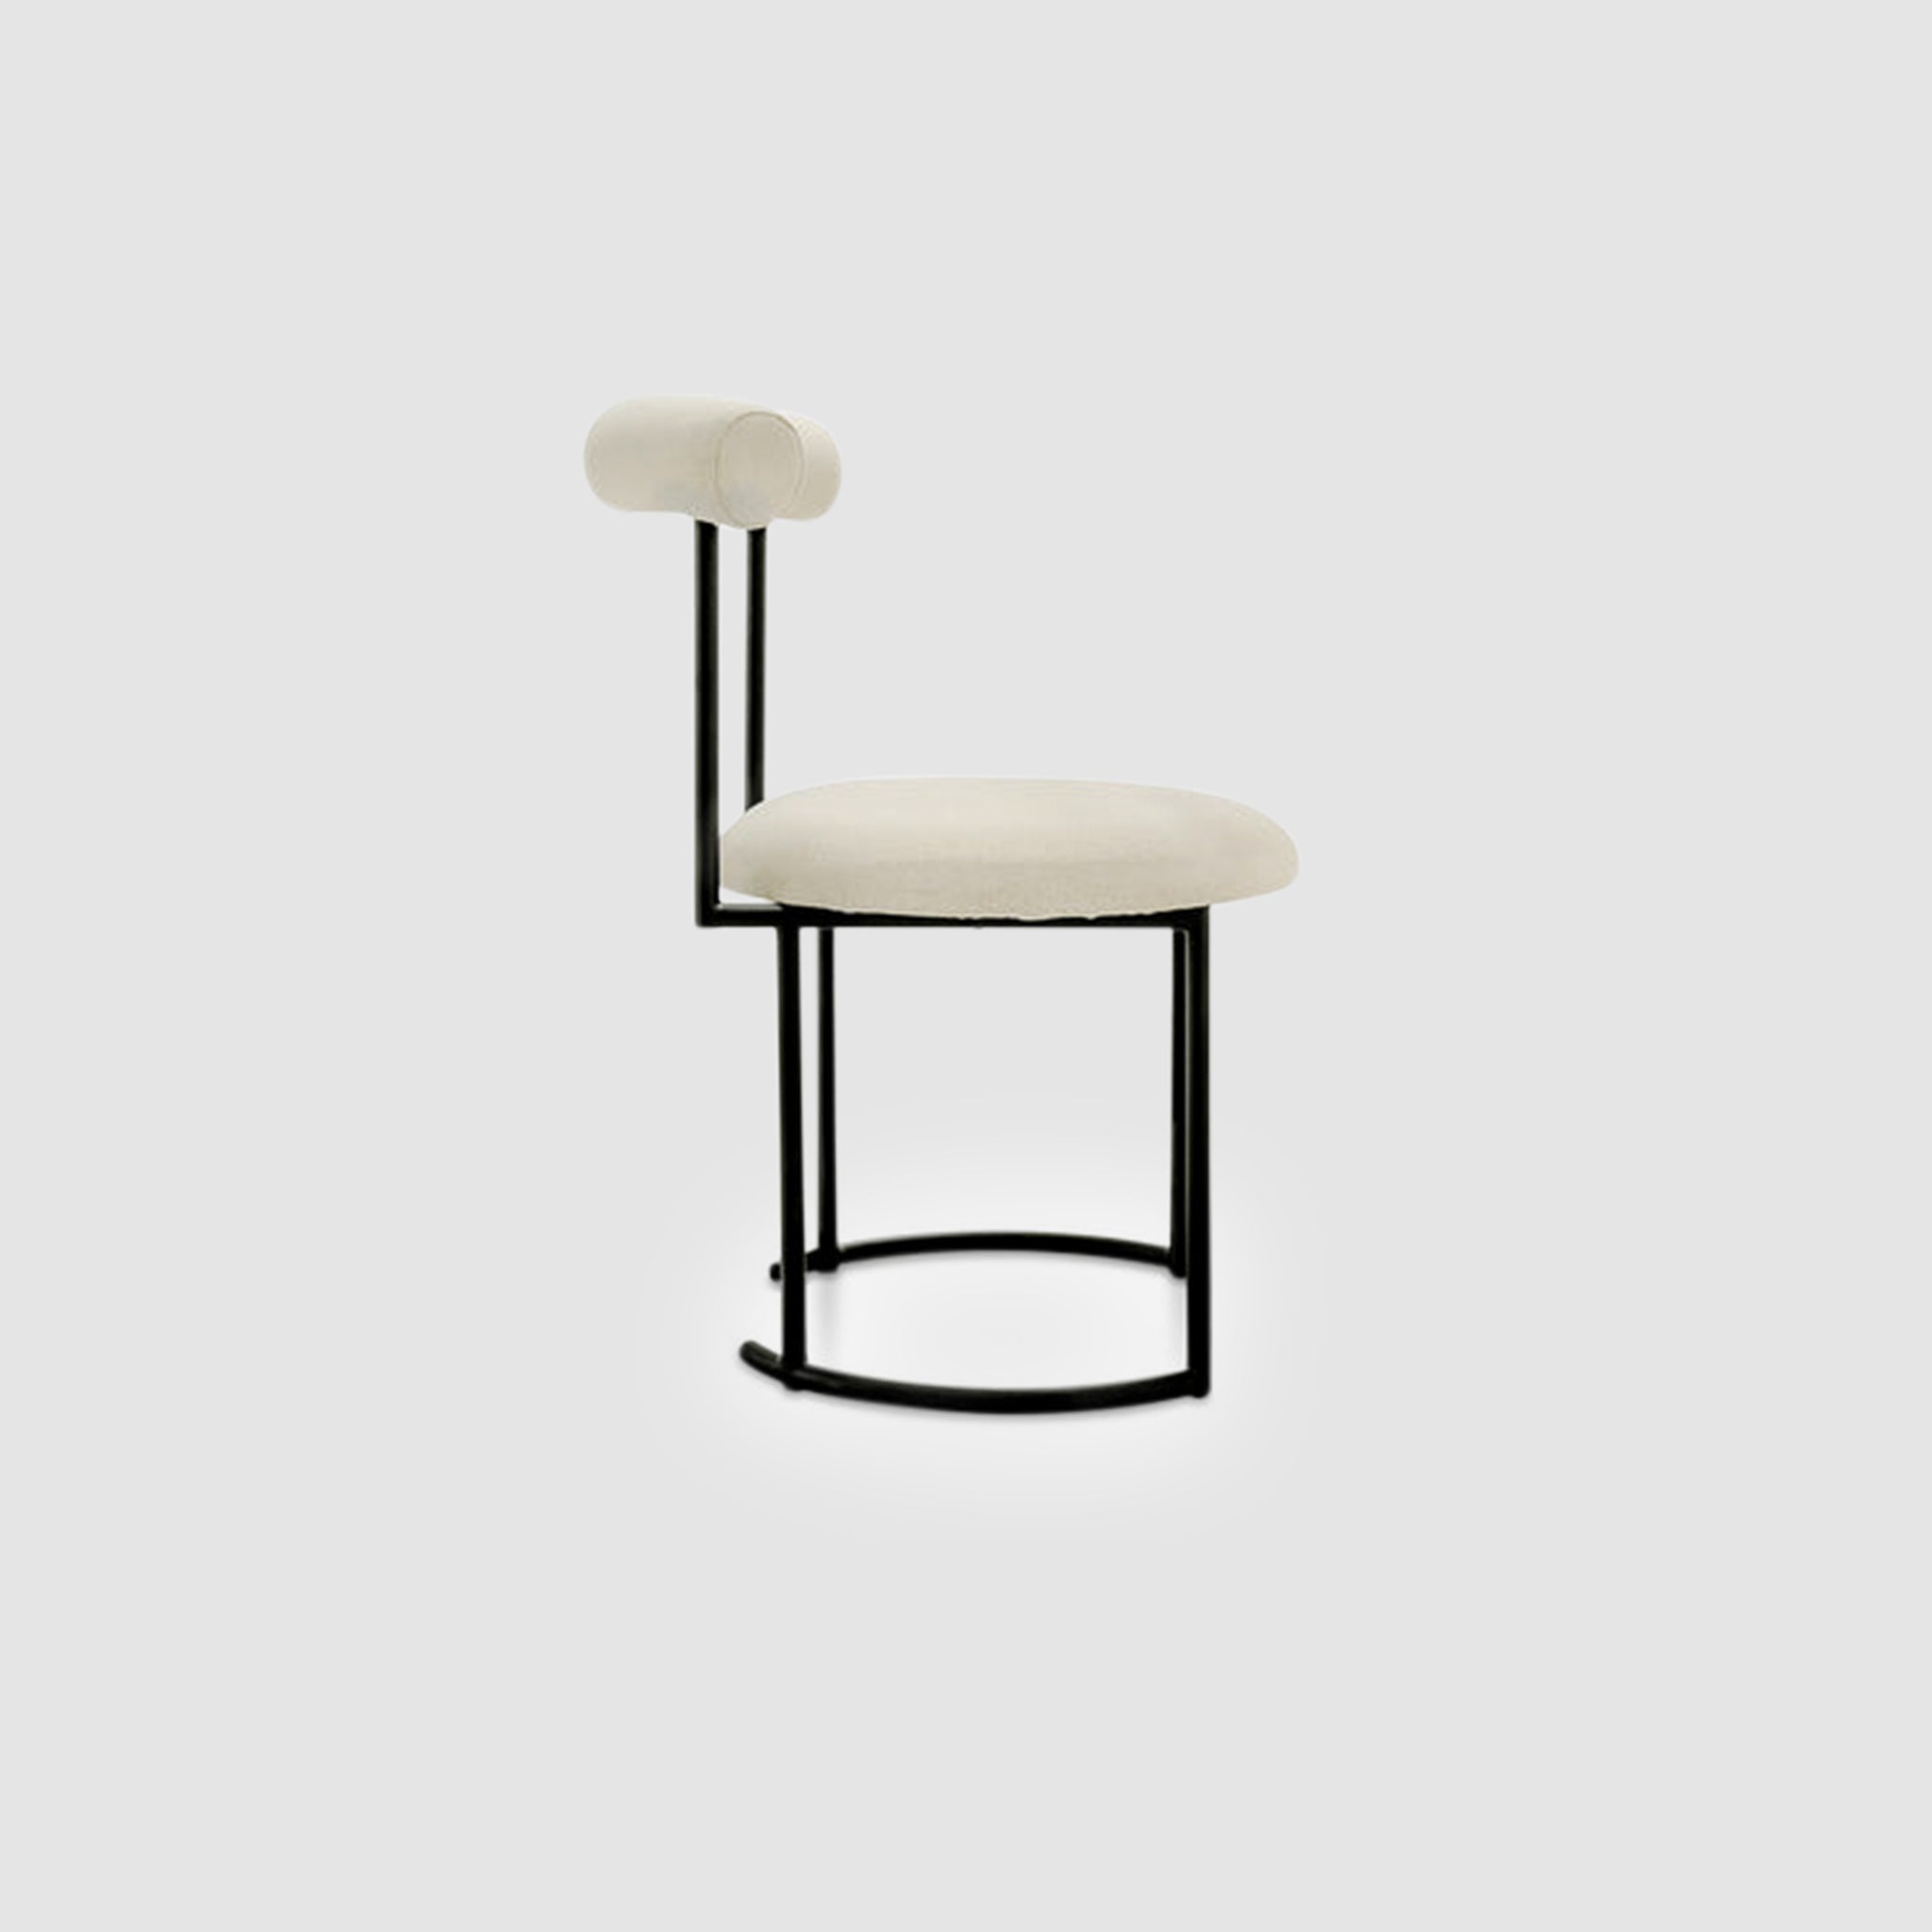 Elegant modern dining chair with rounded back support and powder-coated steel frame, suitable for indoor and outdoor use